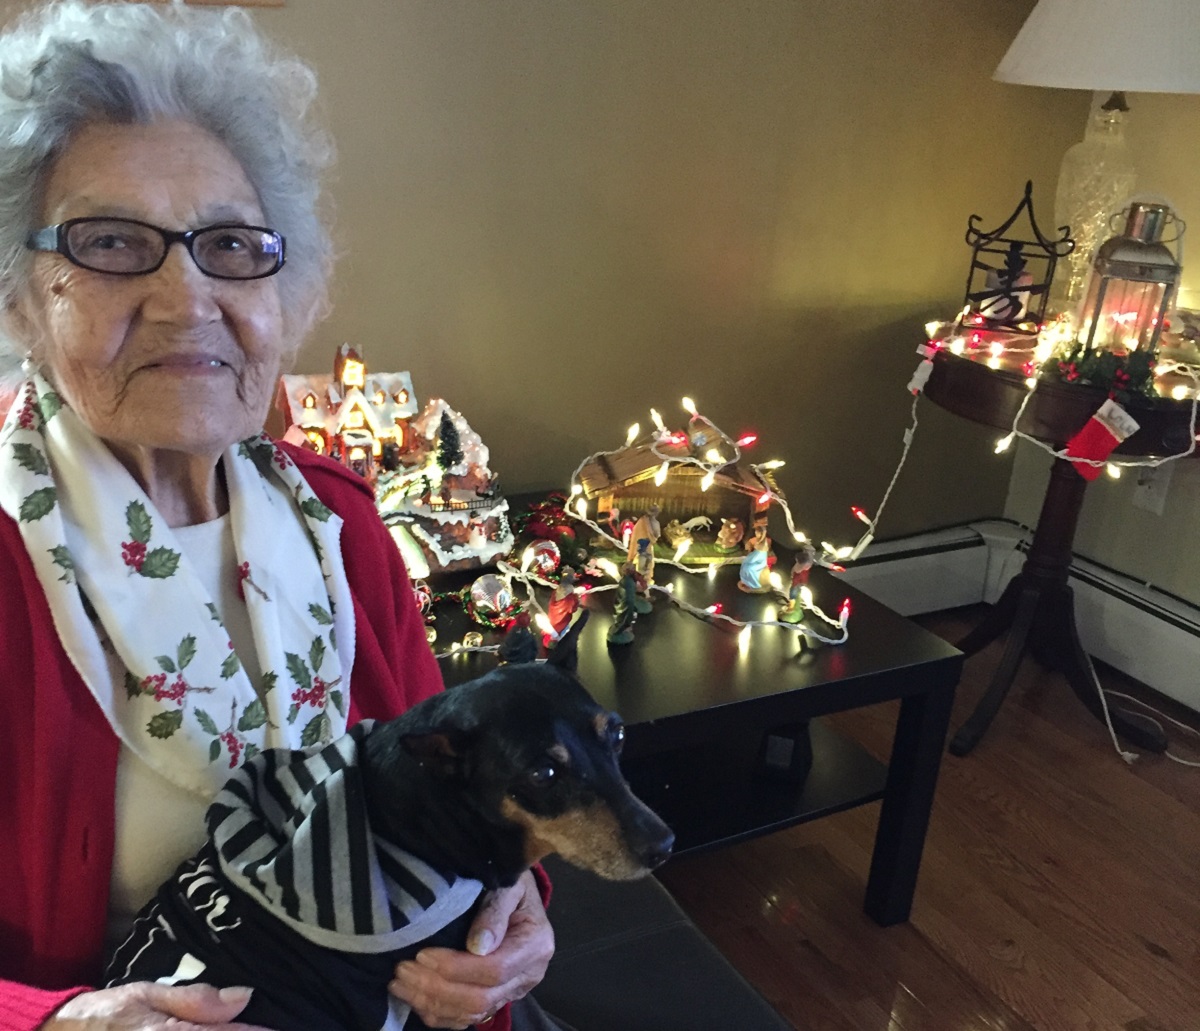 A smiling old woman holds her dog in her lap next to lights and holiday decorations.